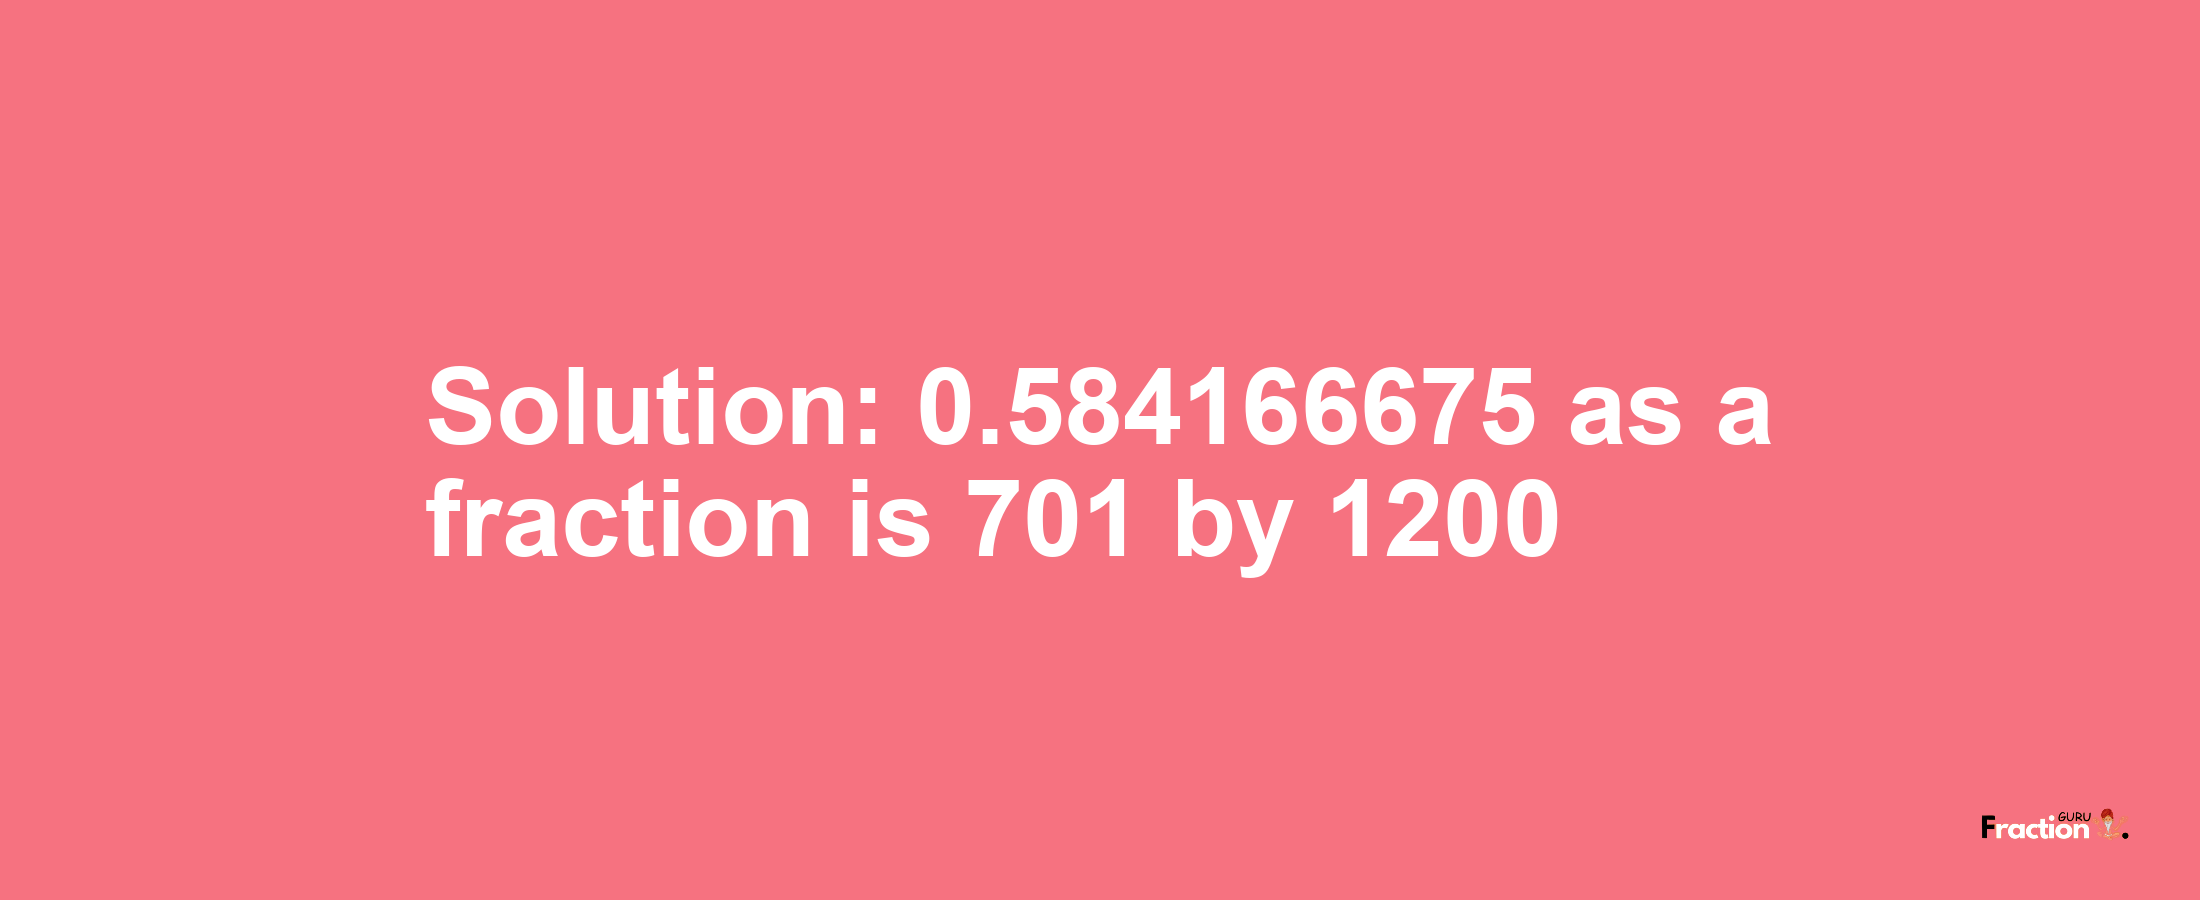 Solution:0.584166675 as a fraction is 701/1200